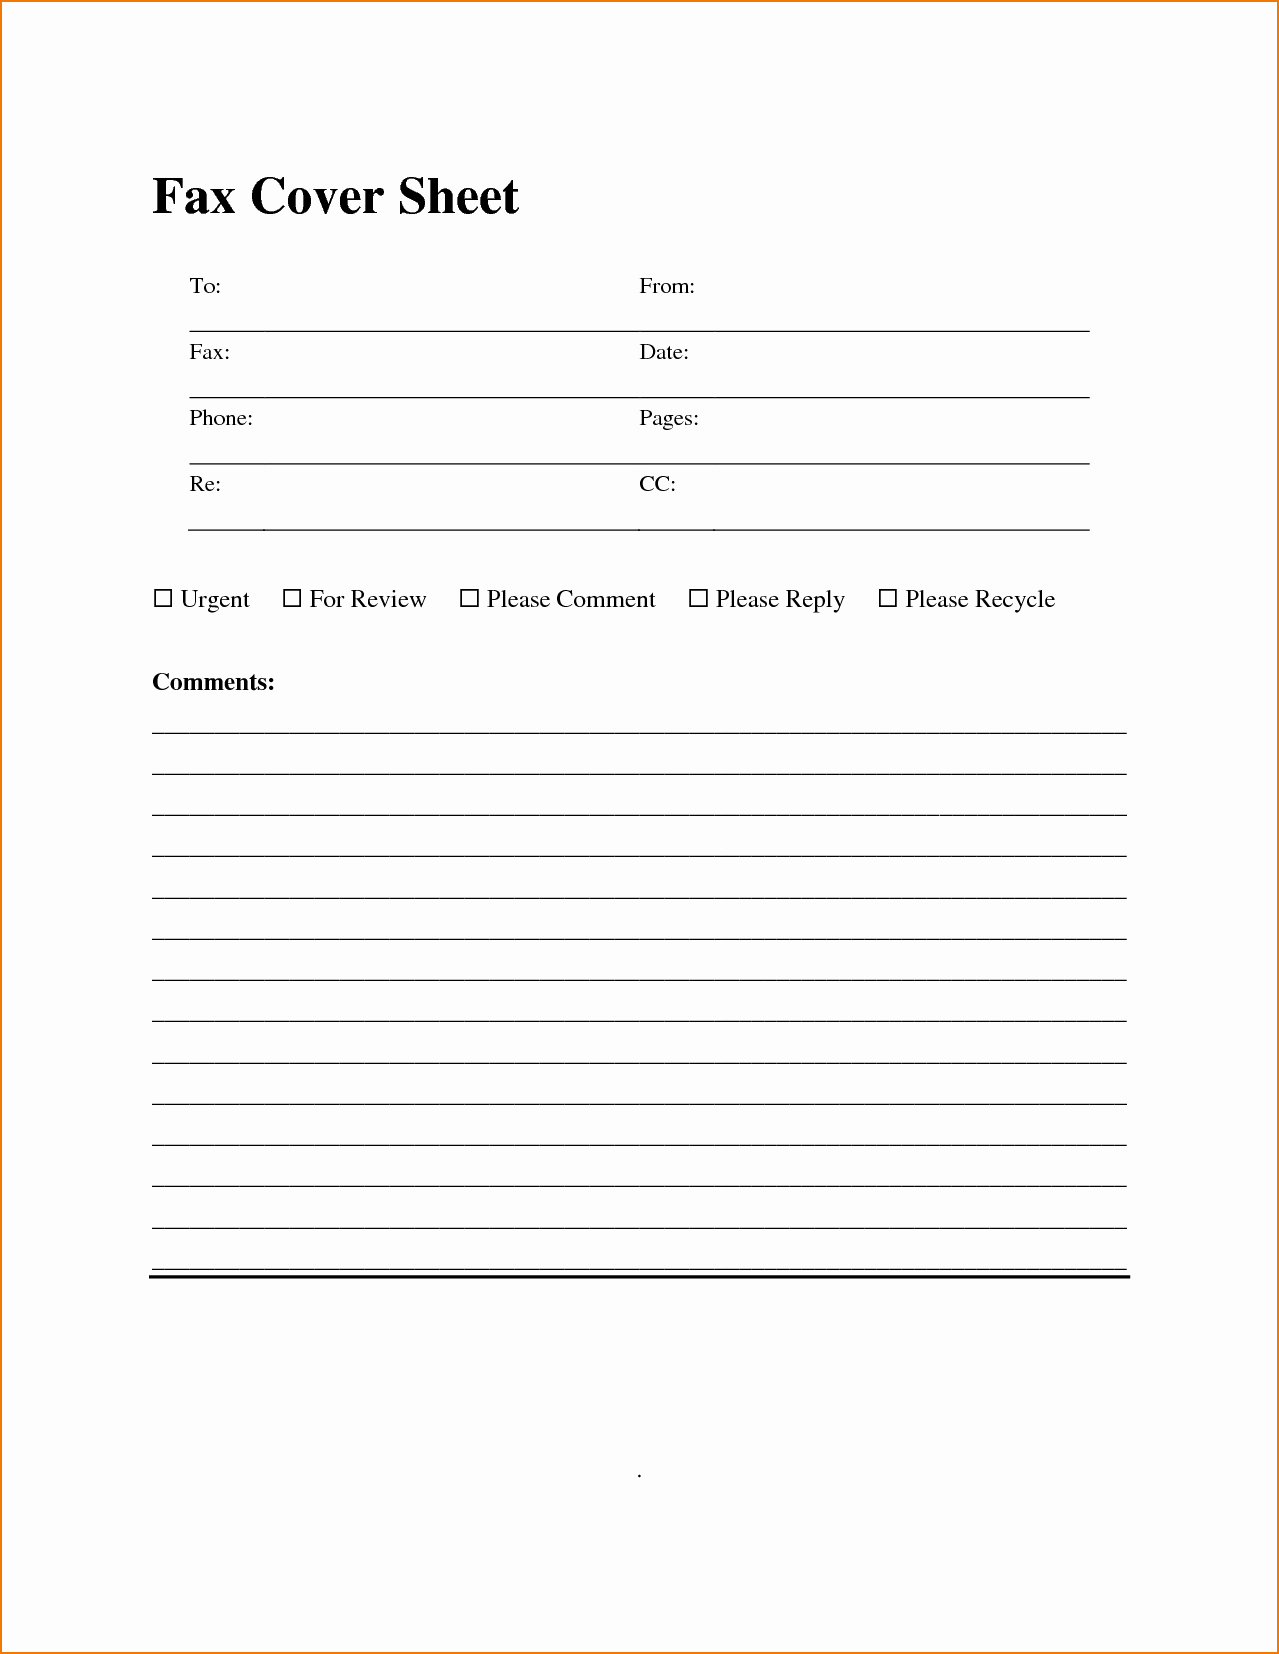 Fax Cover Sheet Template New Download Standard Fax Cover Sheet with Equity theme